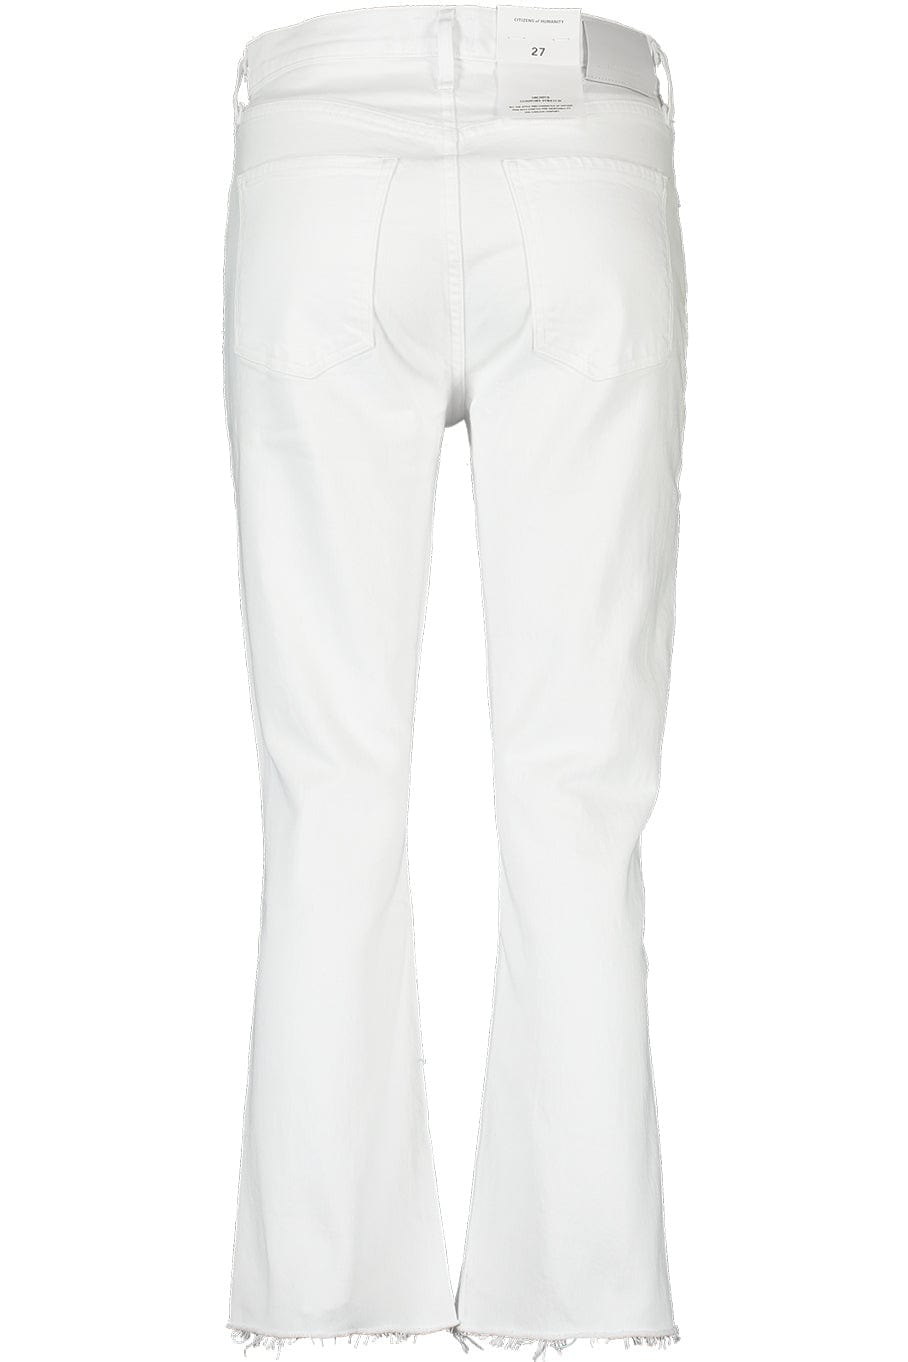 CITIZENS of HUMANITY-Isloa Cropped Boot Pant - Plaster-